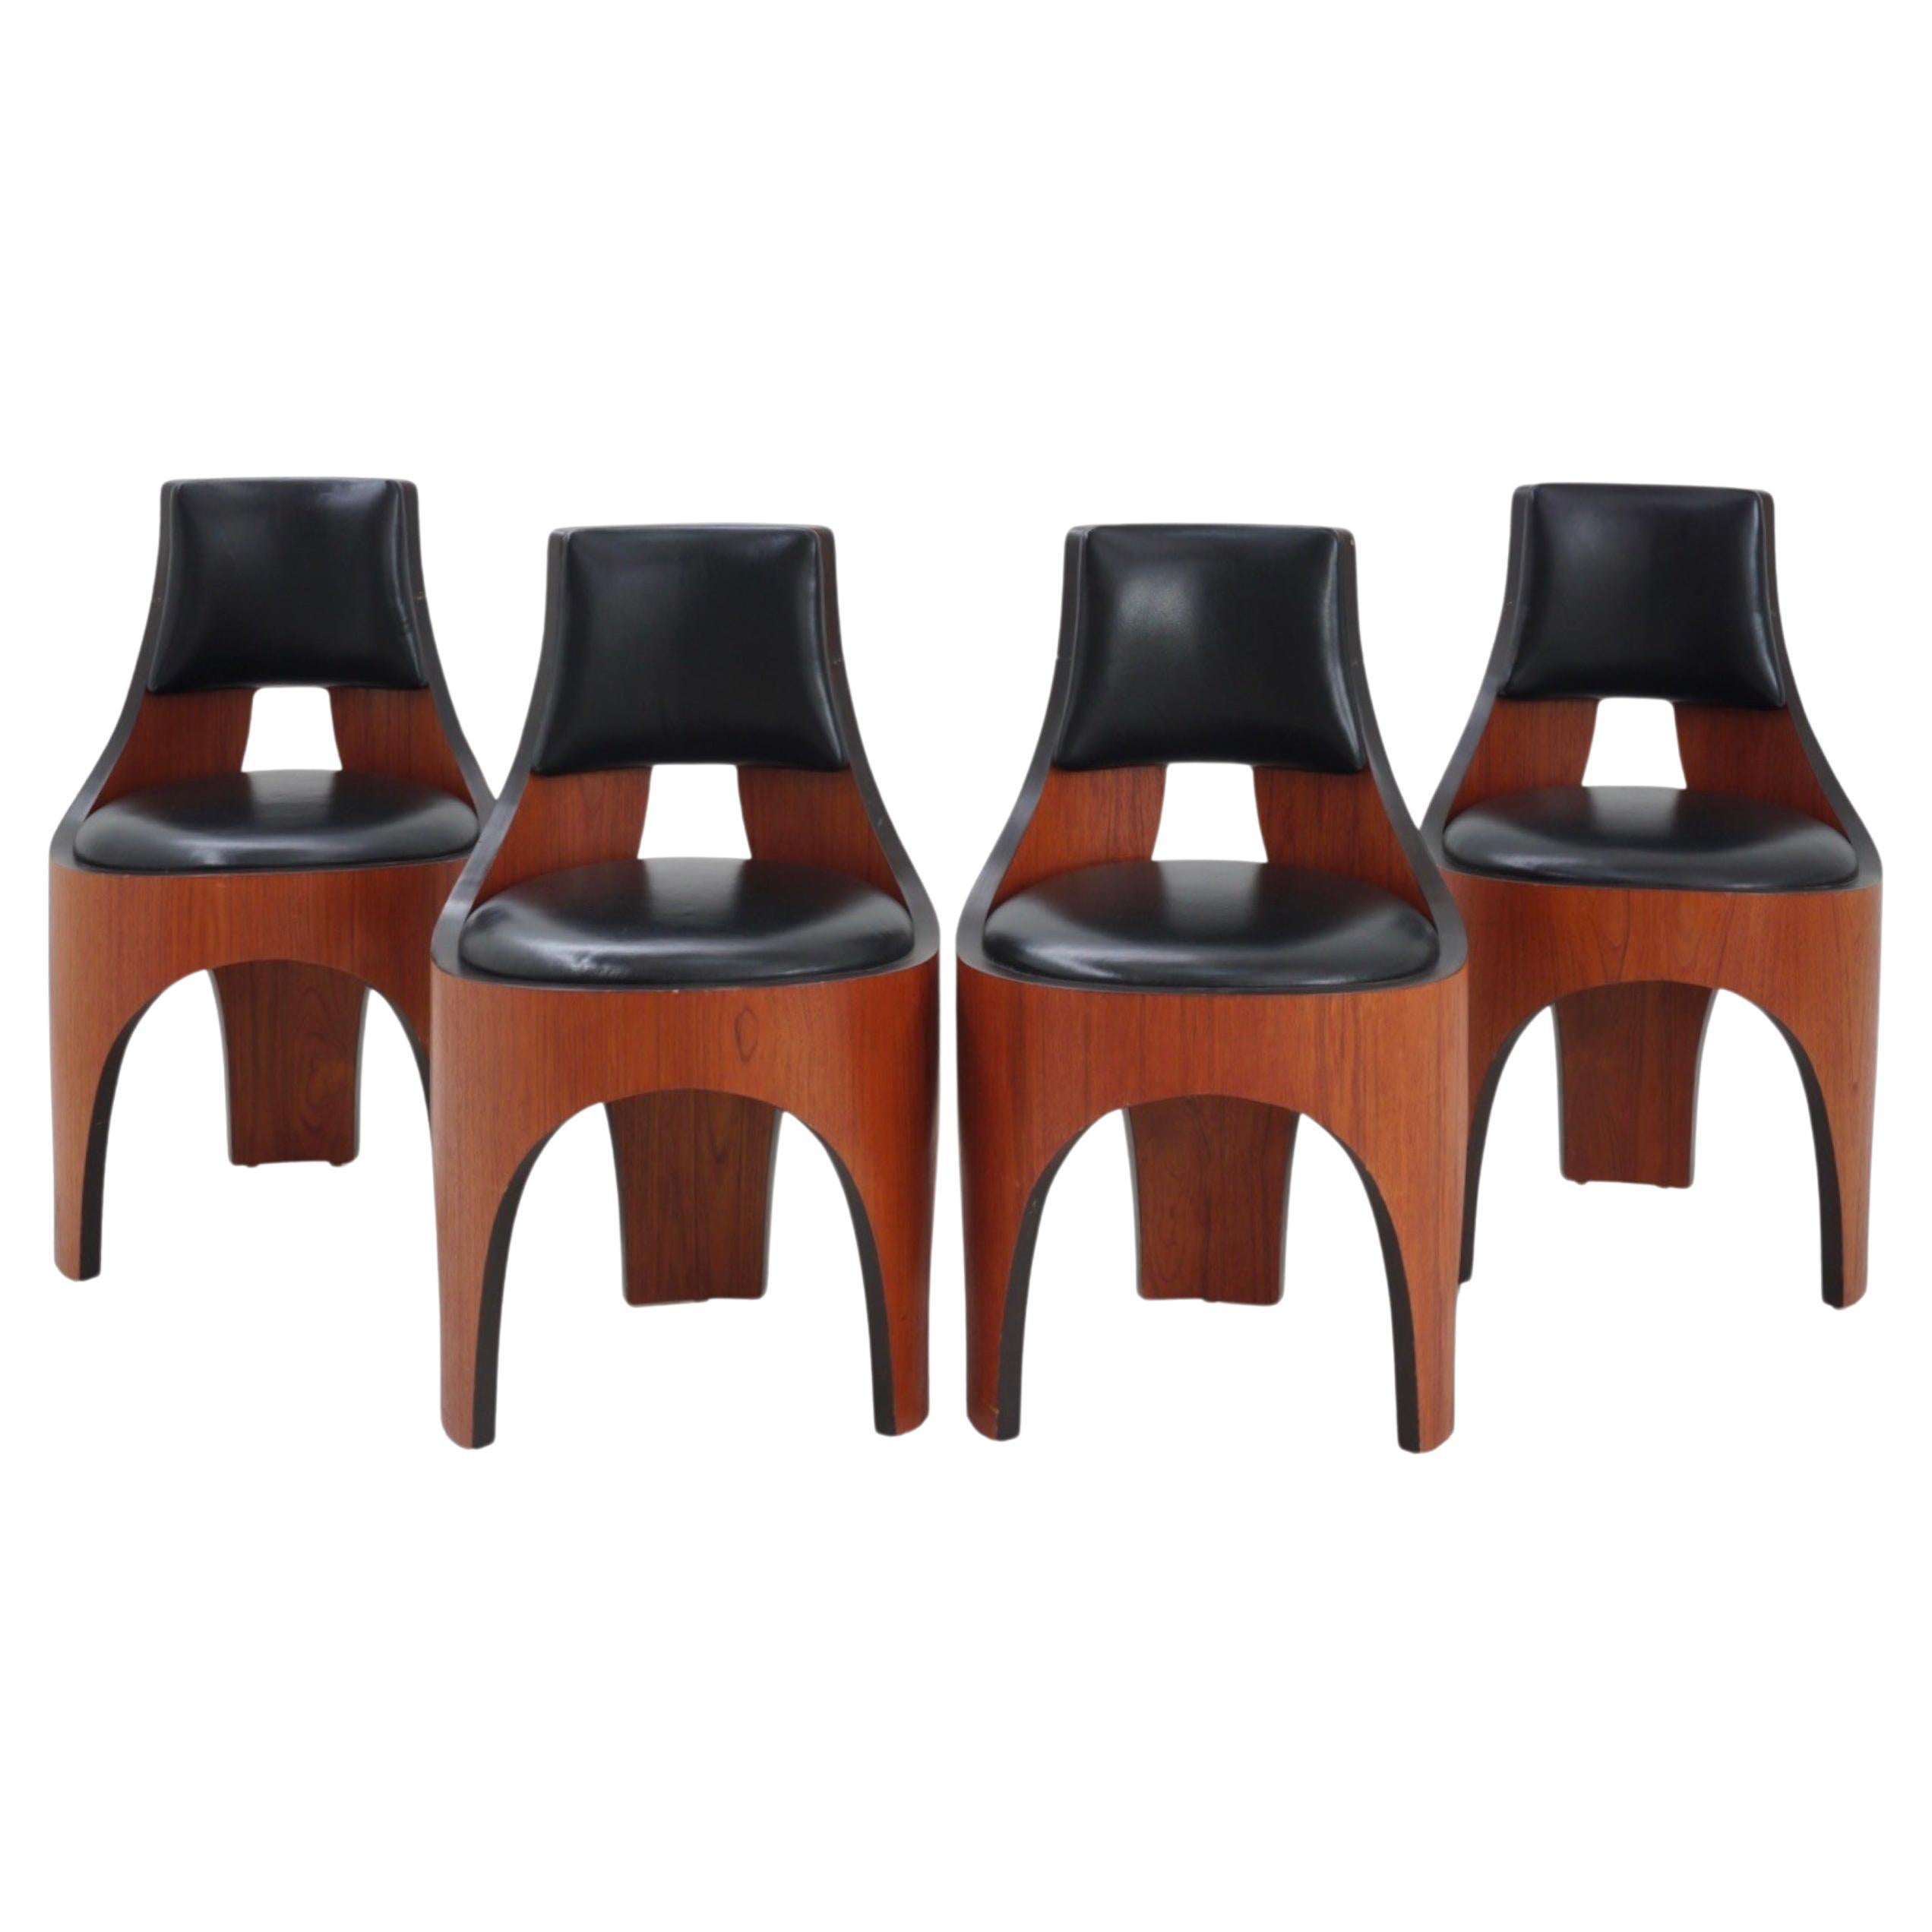 Set of 4 Cylindra Chairs by Henry P. Glass, 1966